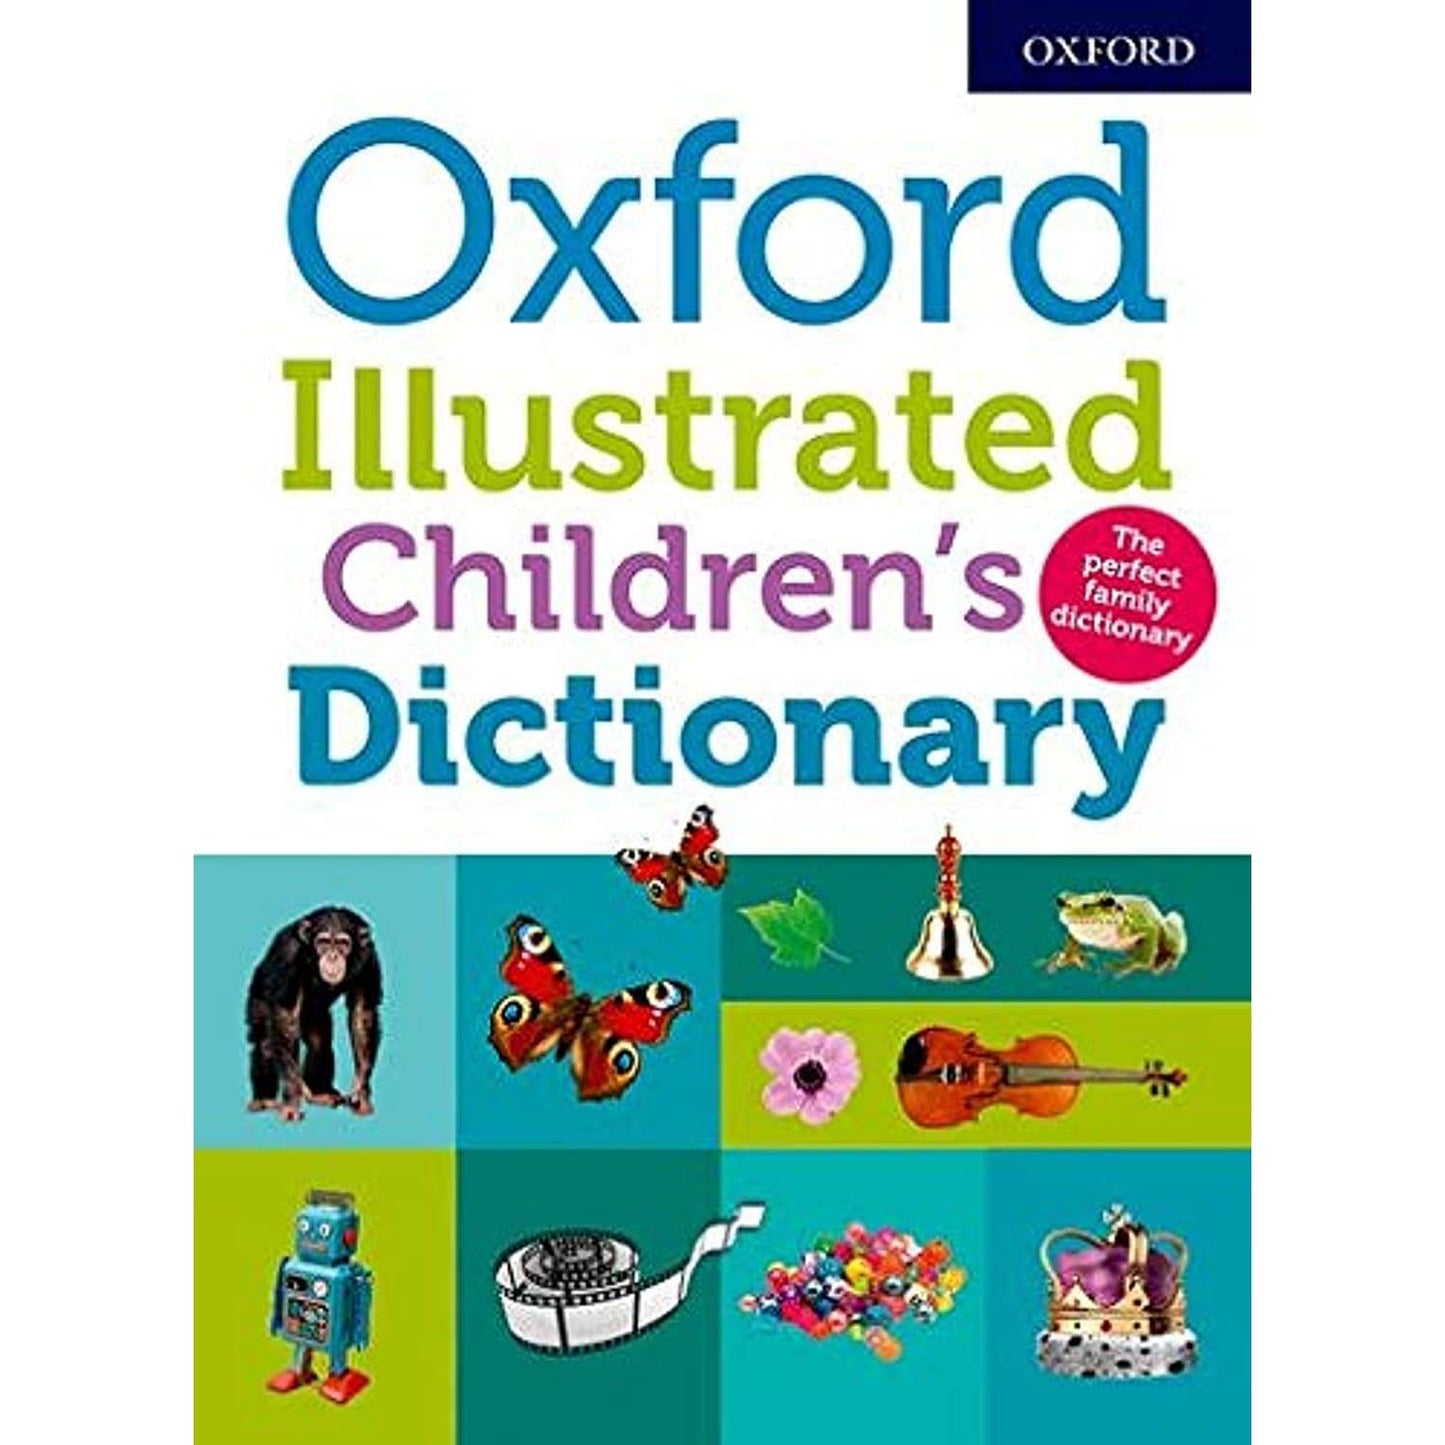 Oxford Illustrated Children's Dictionary | Paperback | Dictionaries & Thesauri for Kids